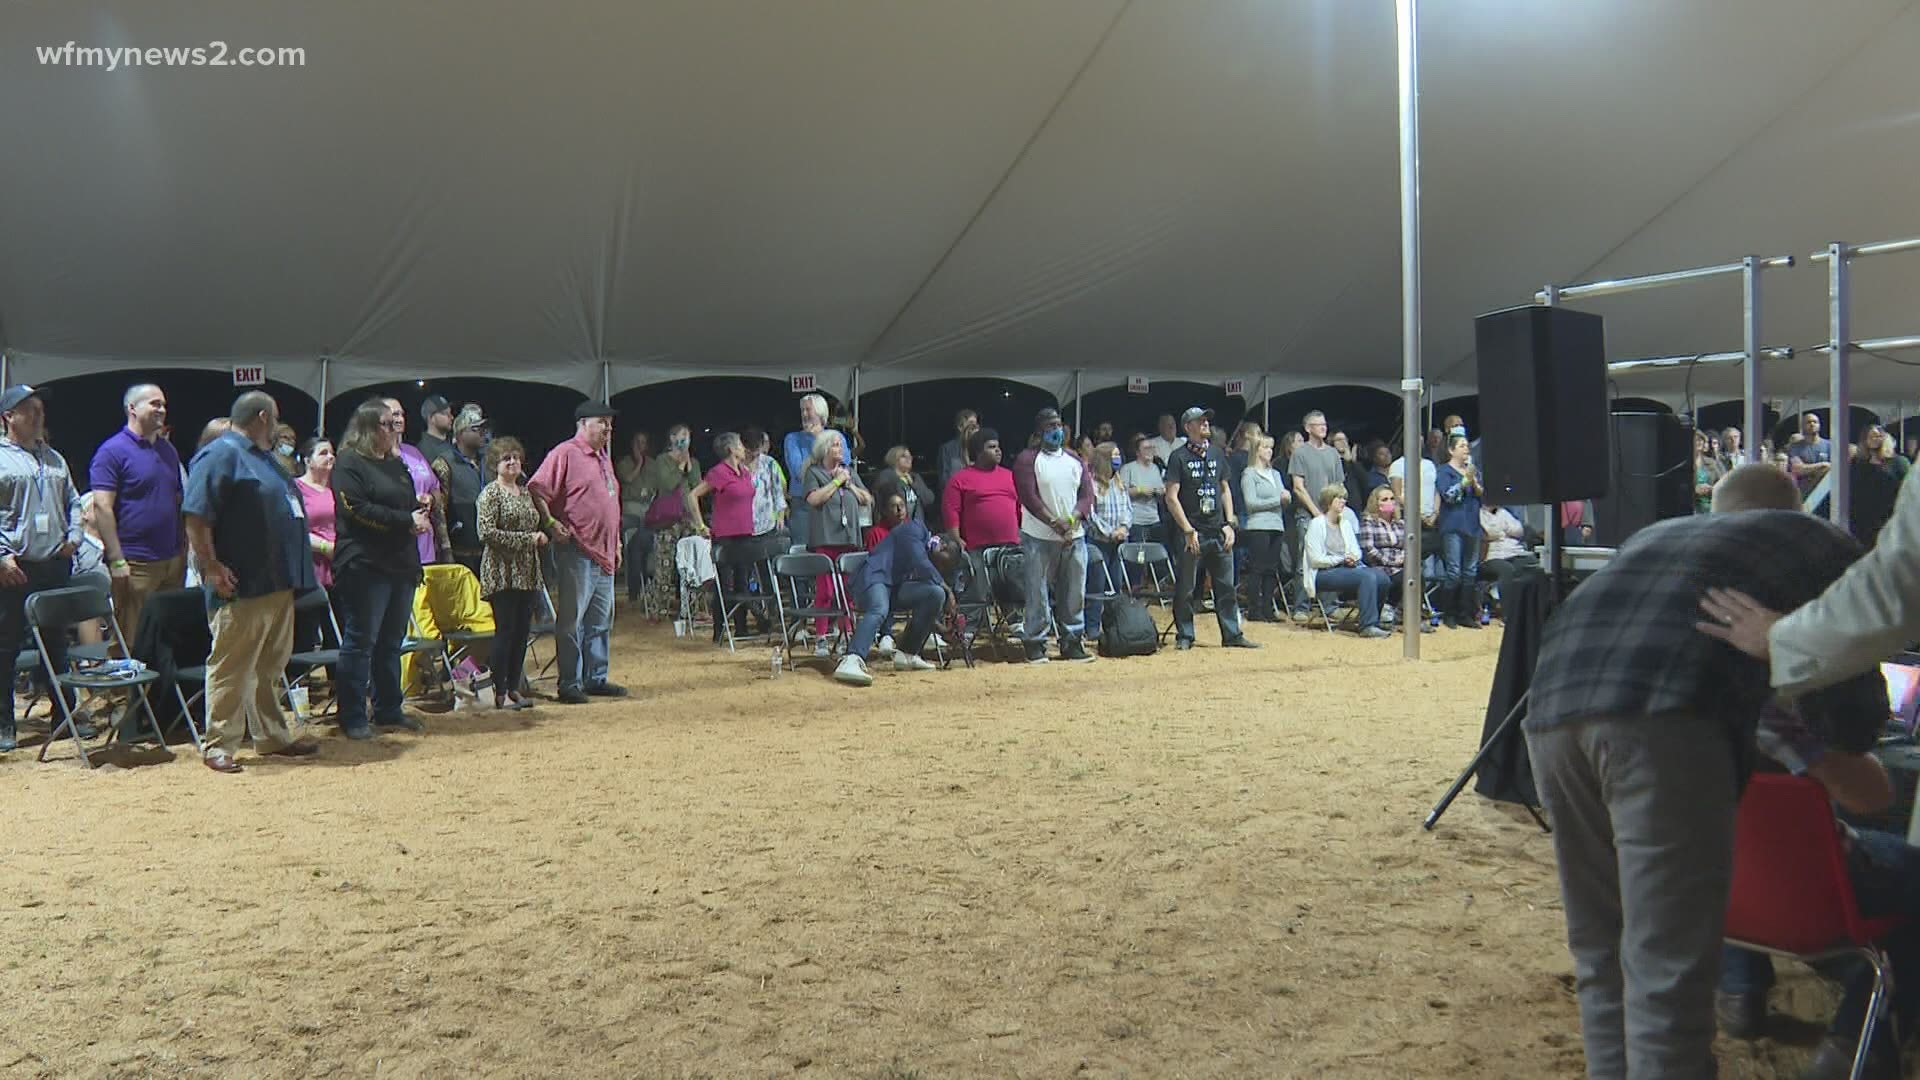 Event organizers and leaders put together plans to keep people safe and healthy at the Burlington Tent Revival.